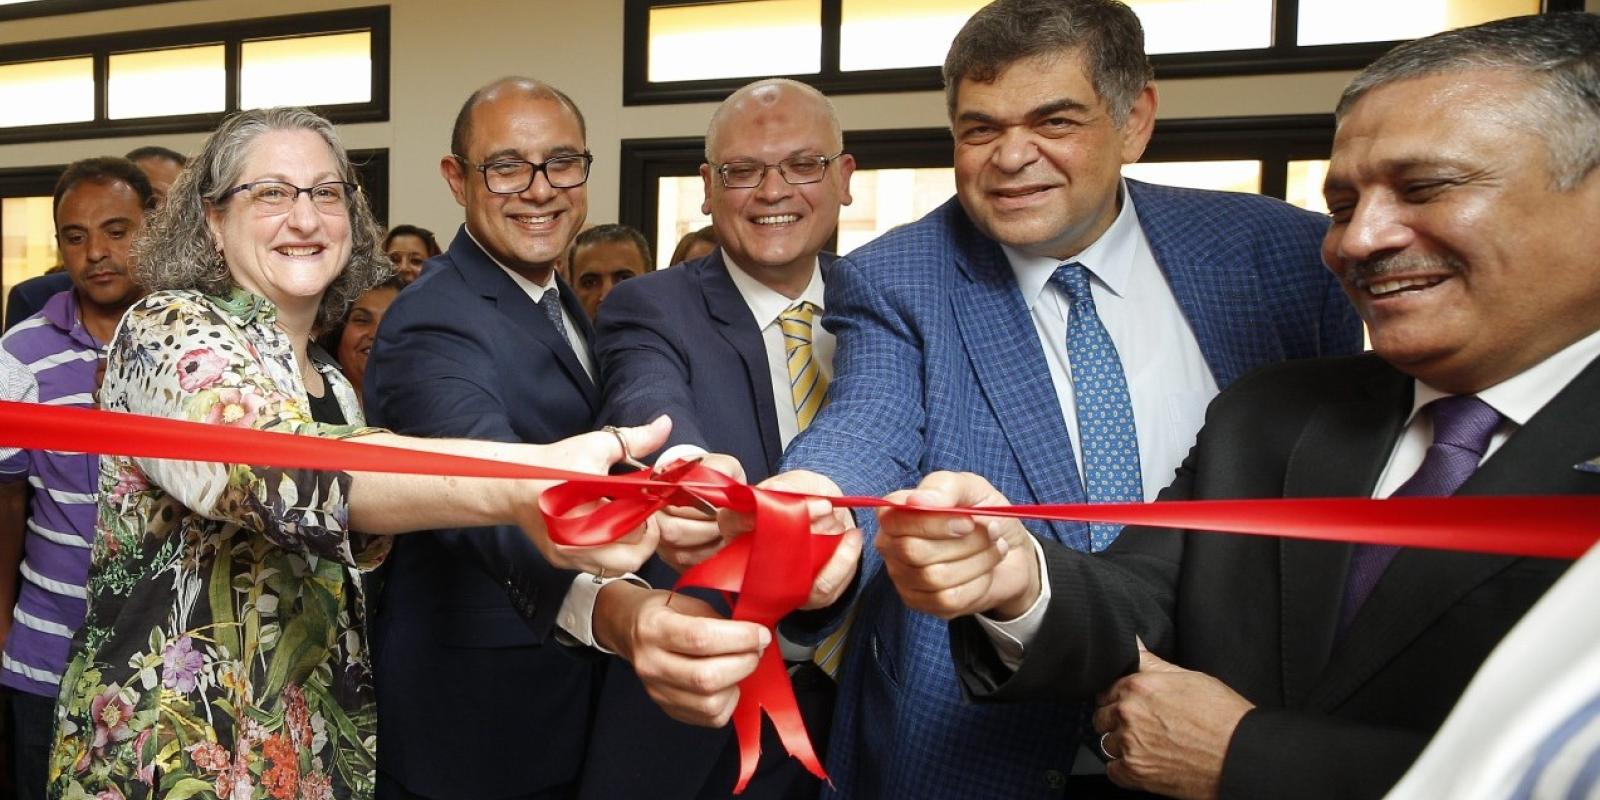 AUC and USAID Celebrate the Inauguration of a New University Center for Career Development at Ain Shams University 